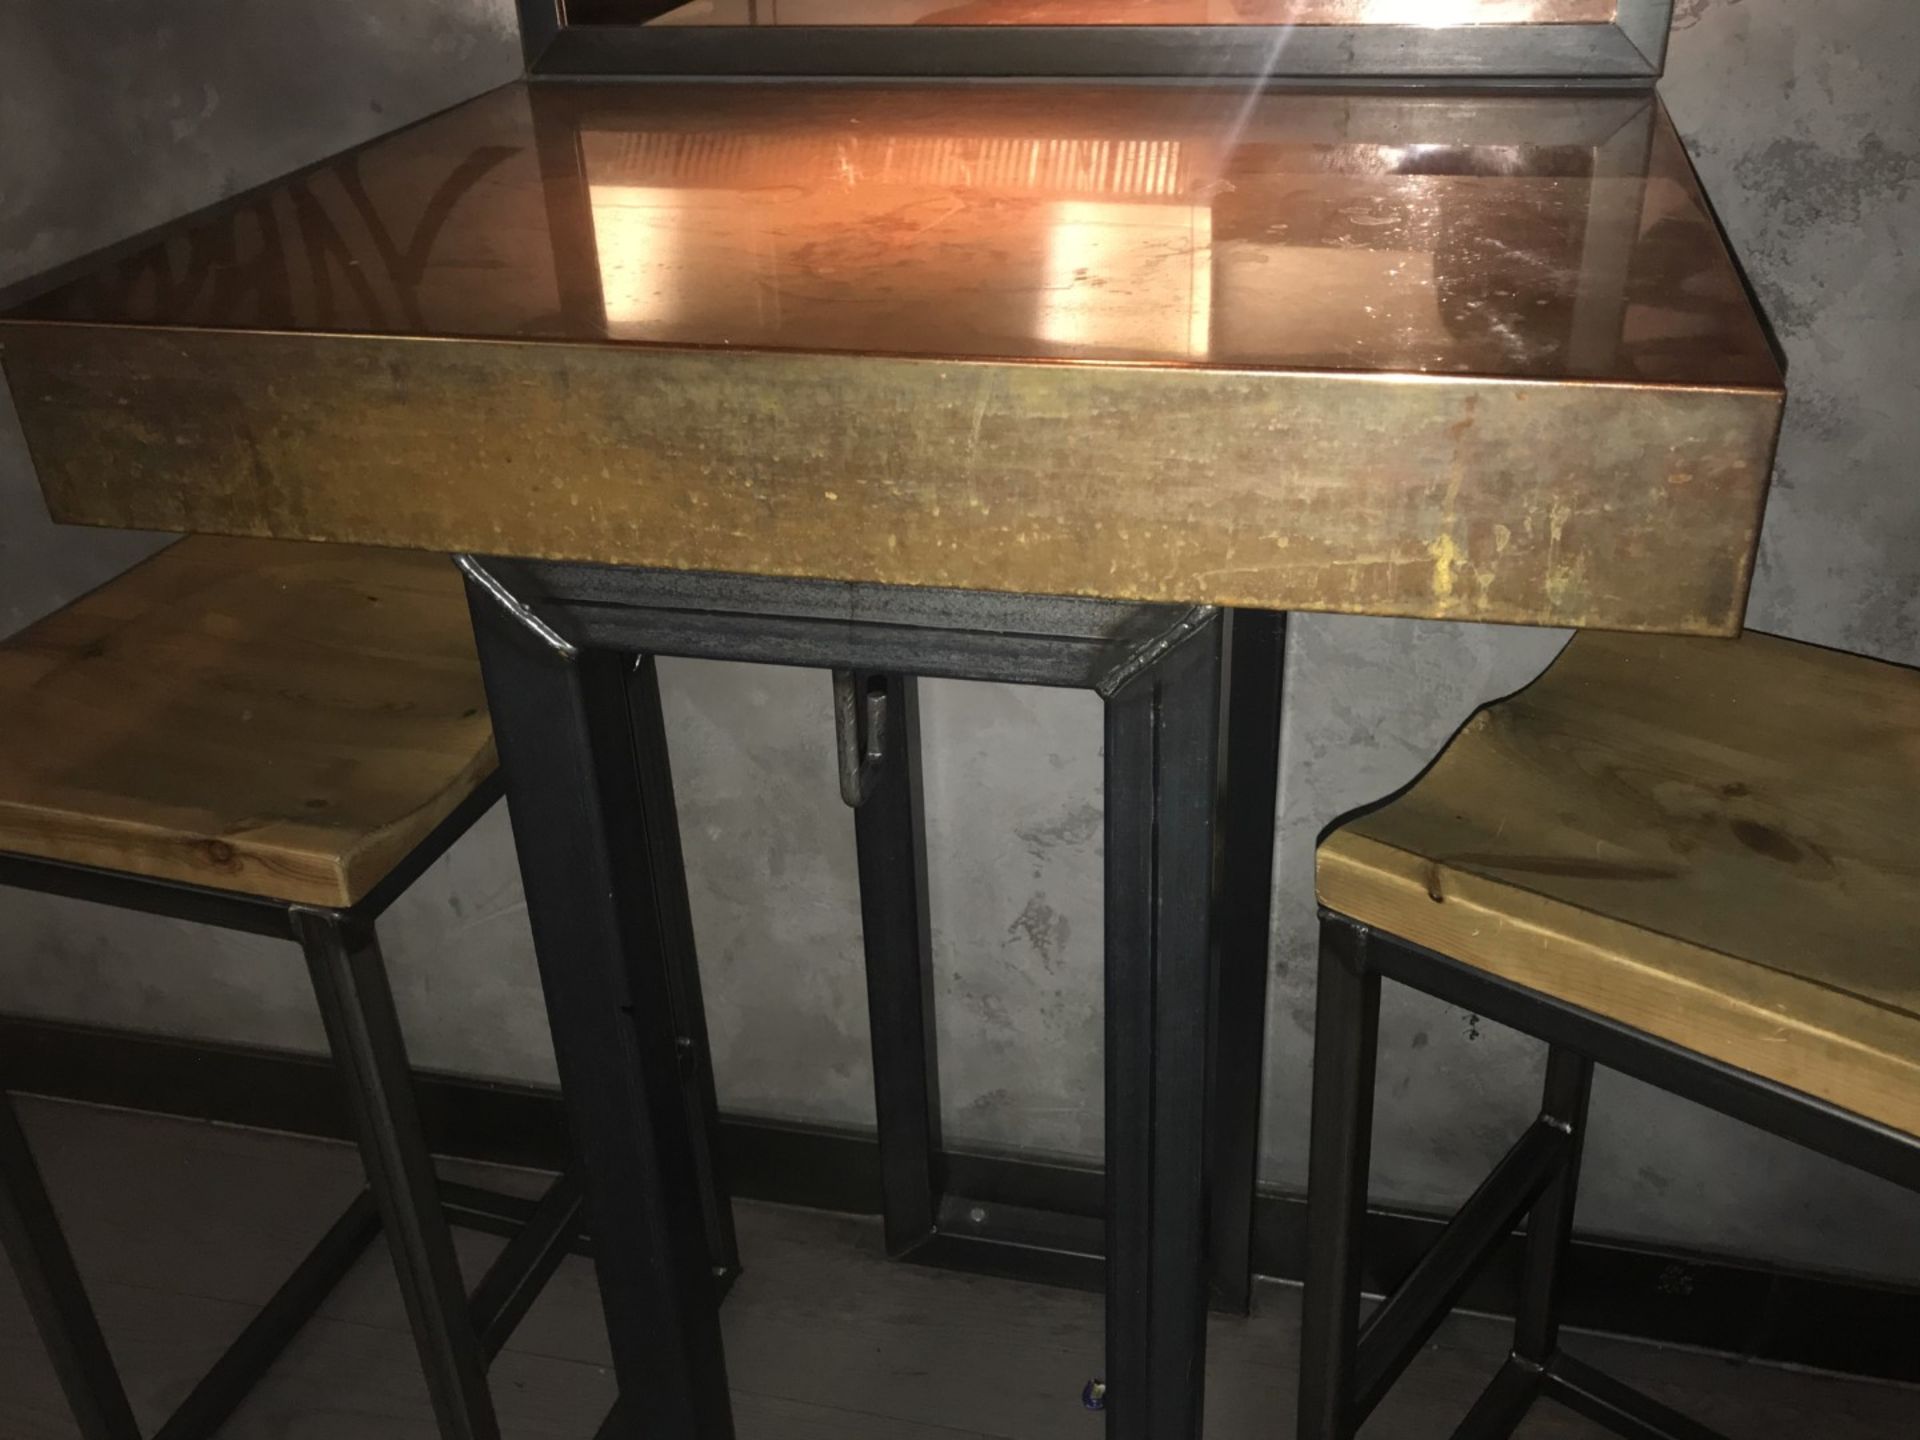 1 x Restaurant Poser Table With Industrail Metal Base and Copper Top - Size H110 x W60 x D75 cms - - Image 3 of 5